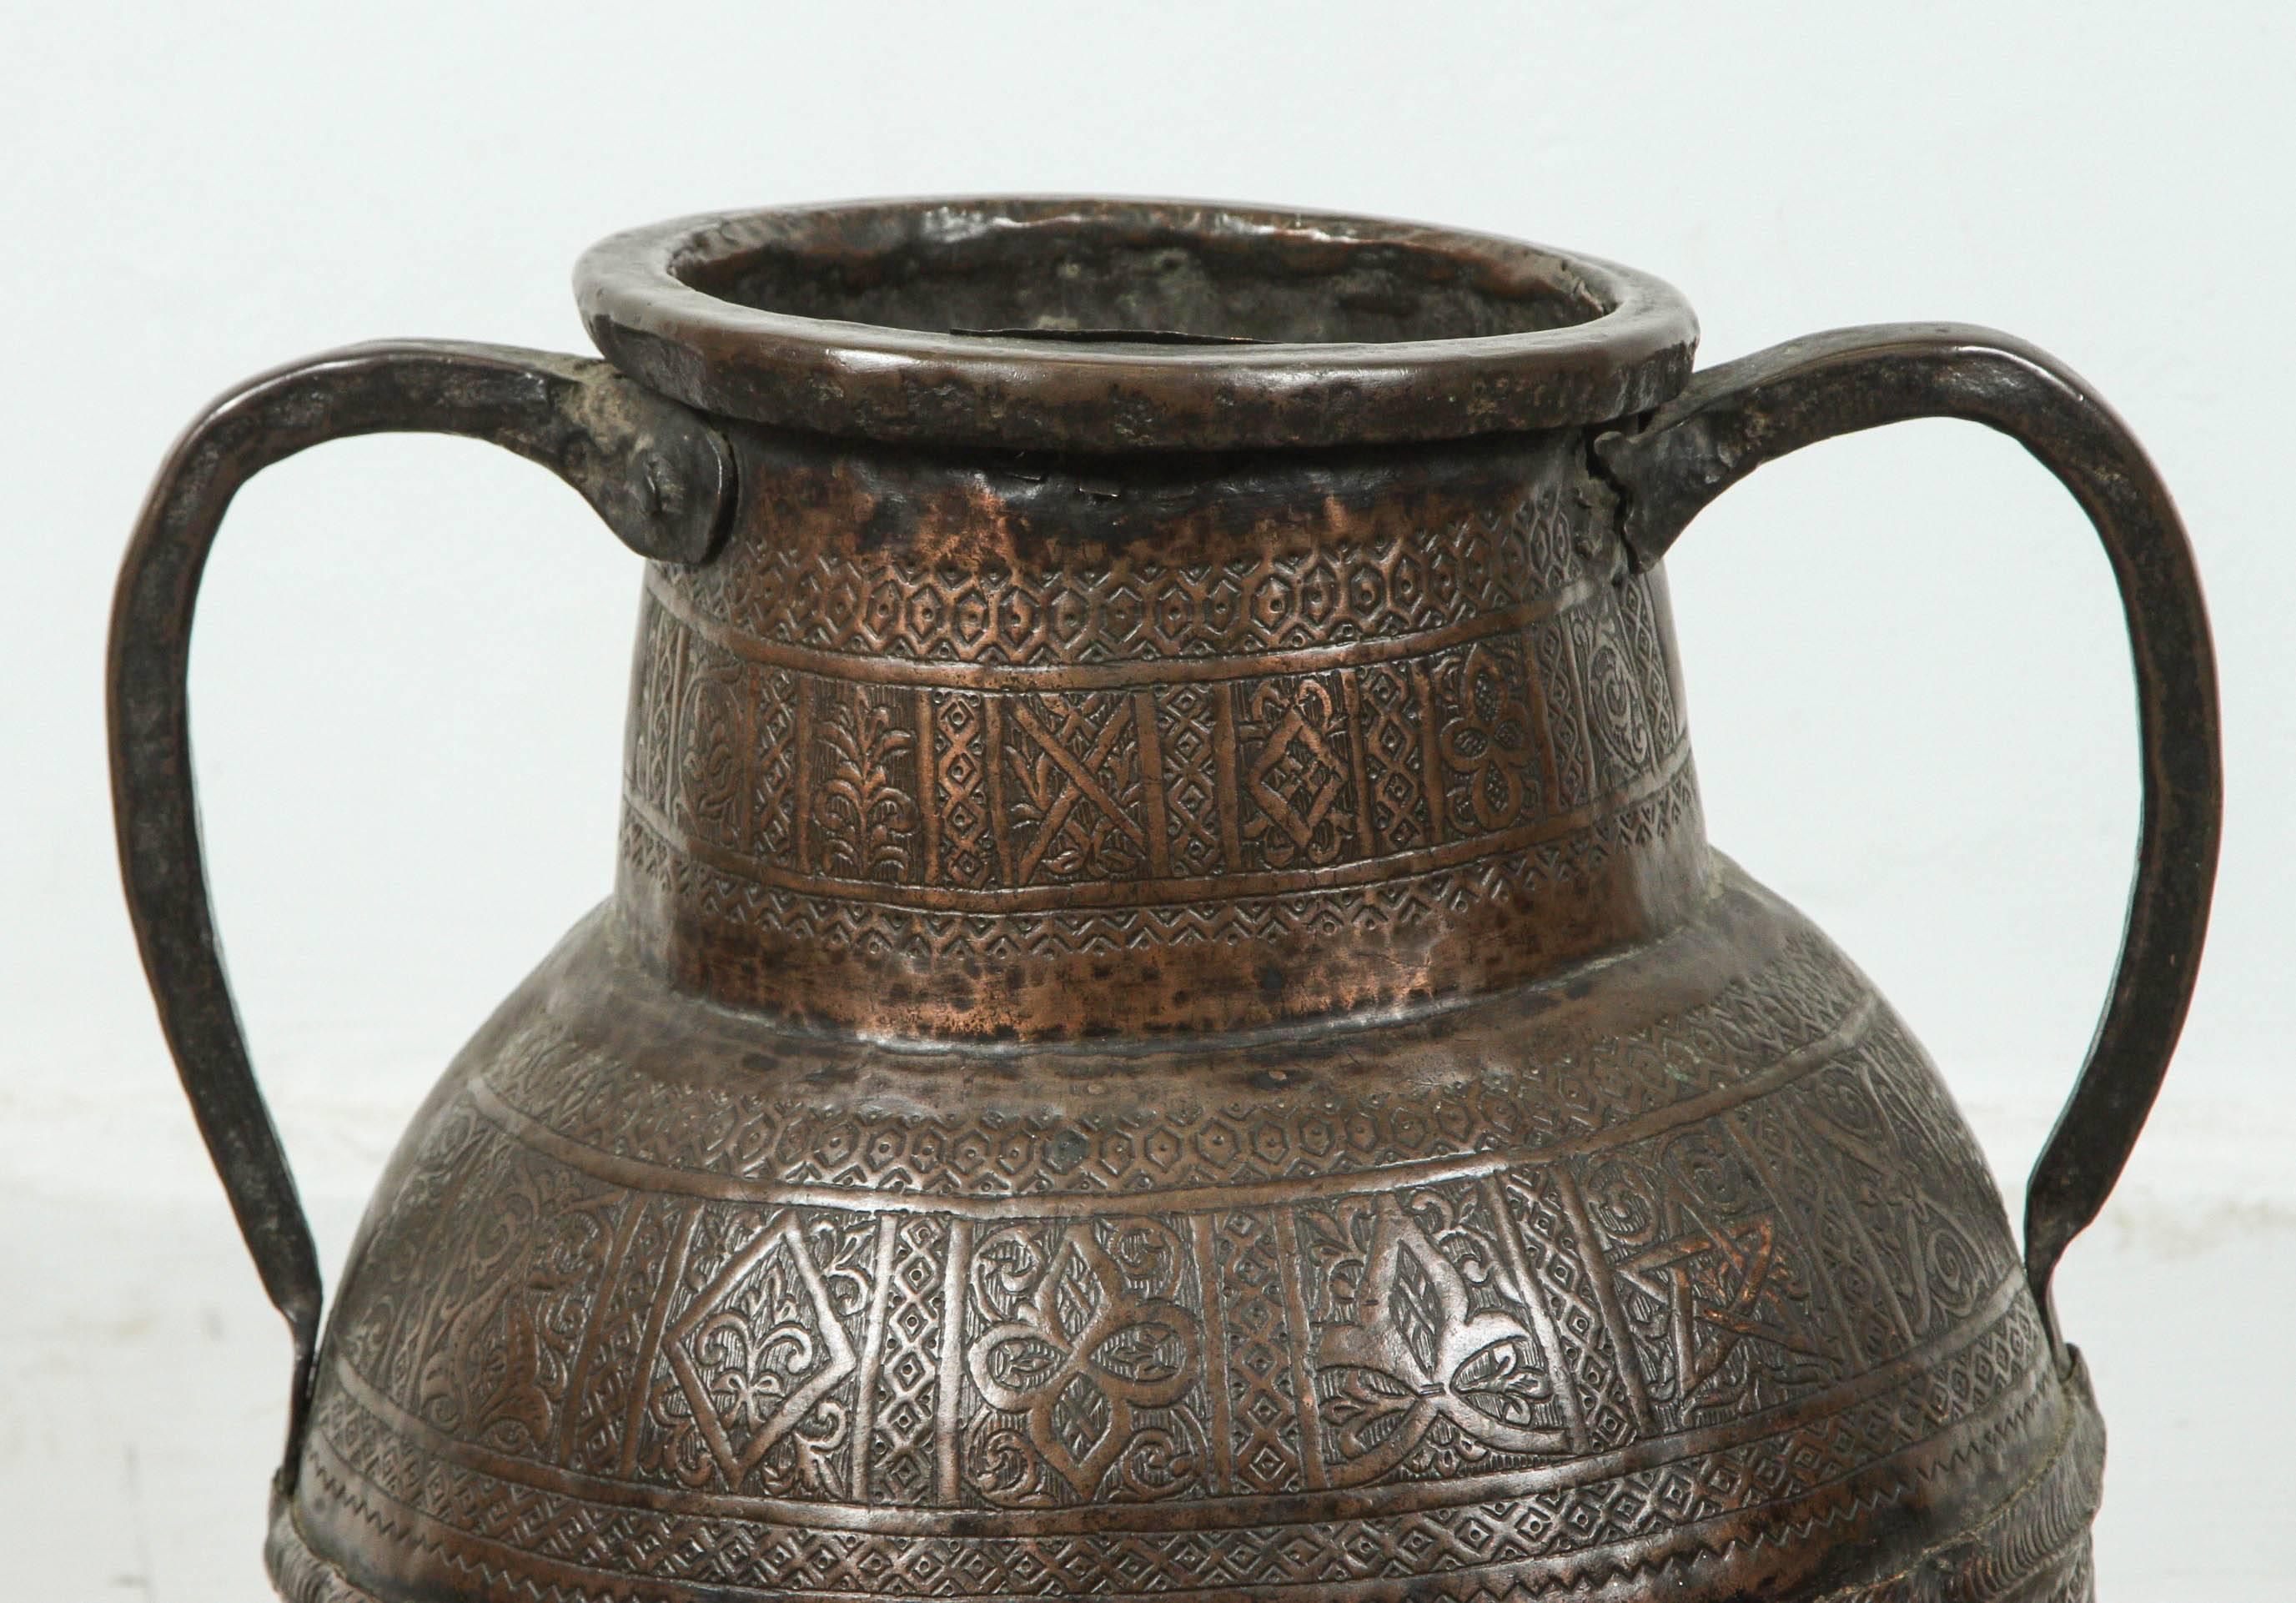 Antique Persian copper pot with handle, heavenly hand-hammered with intricate designs, Arabesque, stars and foliages.
Very old the top opening has been repaired, and there is some small holes, will not hold water.
Late 18th century, early 19th